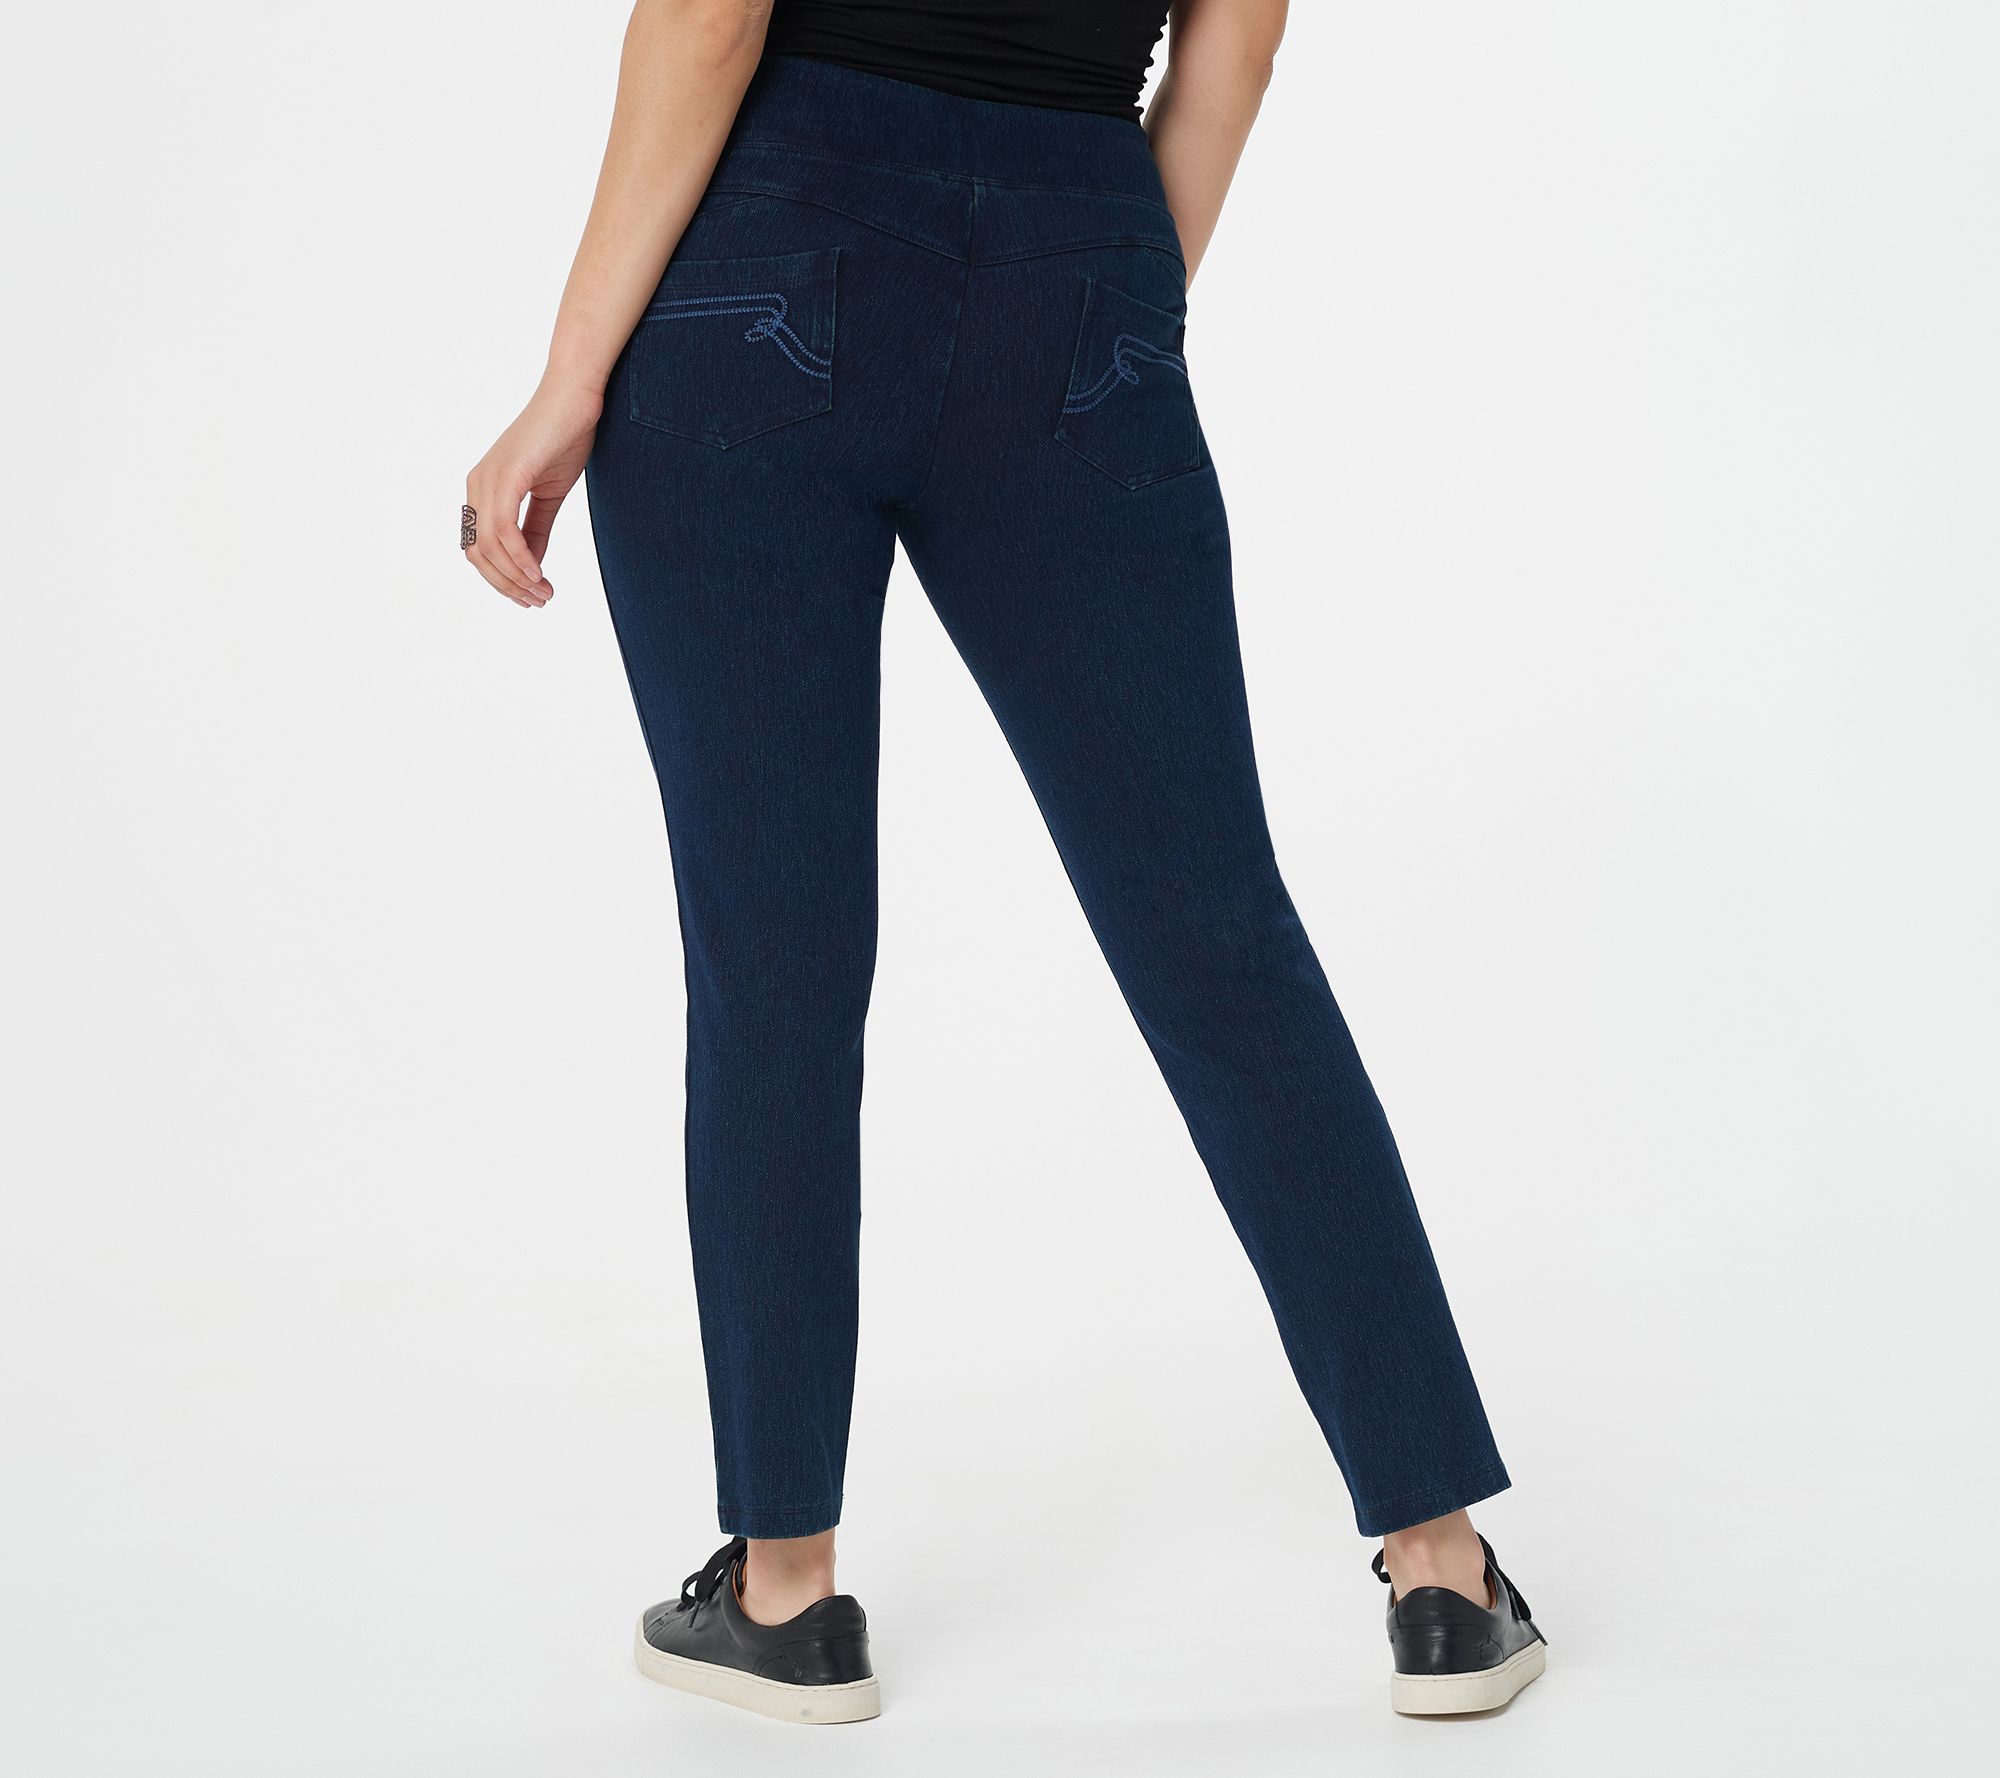 Women with Control Tall Prime Stretch Denim Leggings with Pockets 